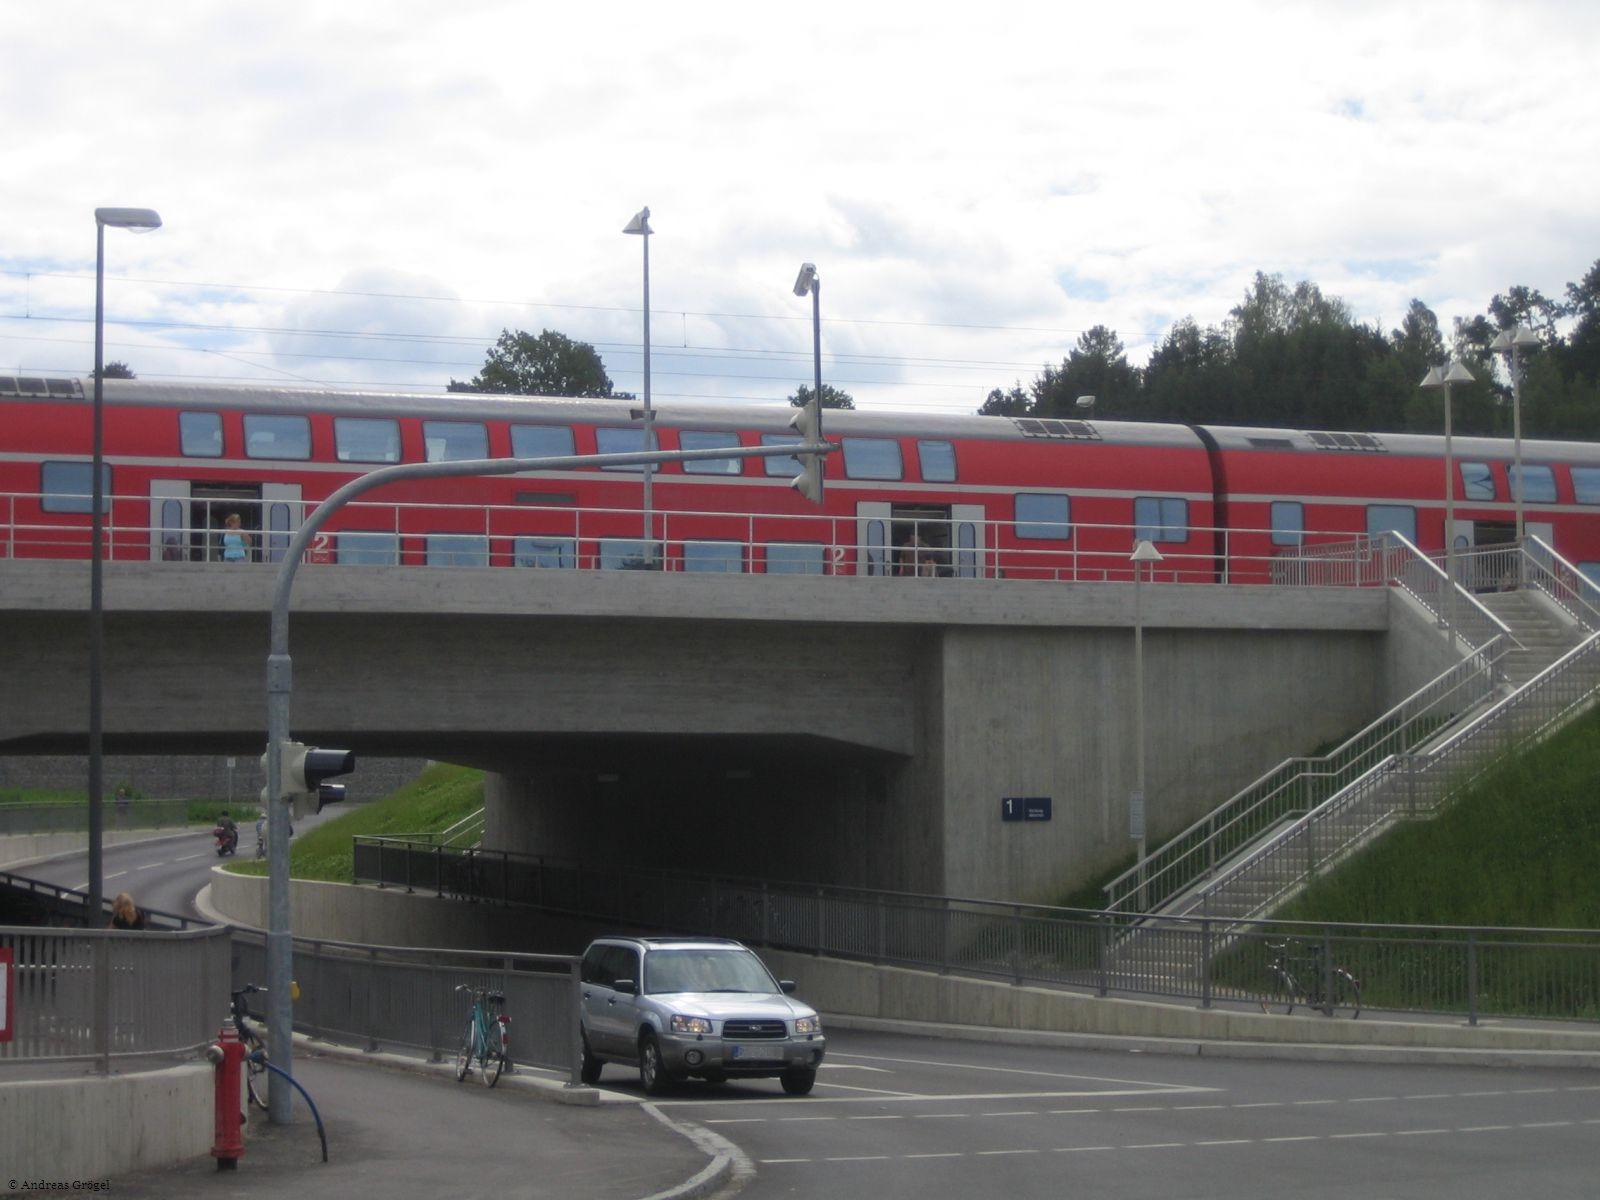 Railway station with regional train over new underpass